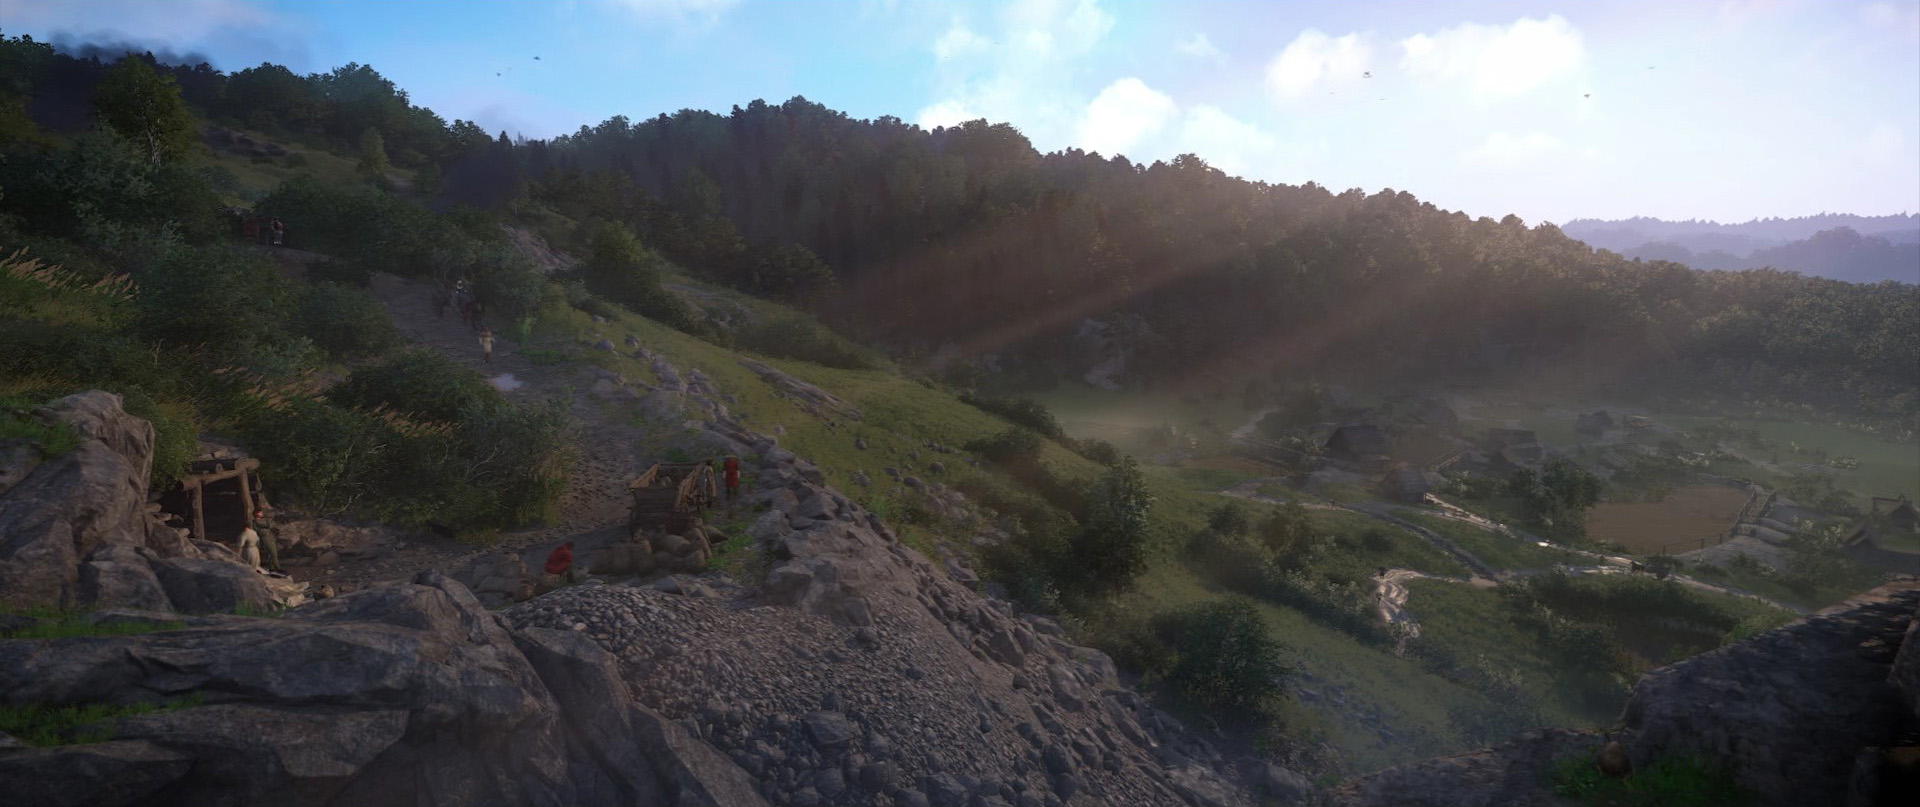 Kingdom Come provides gorgeous vistas in its open world